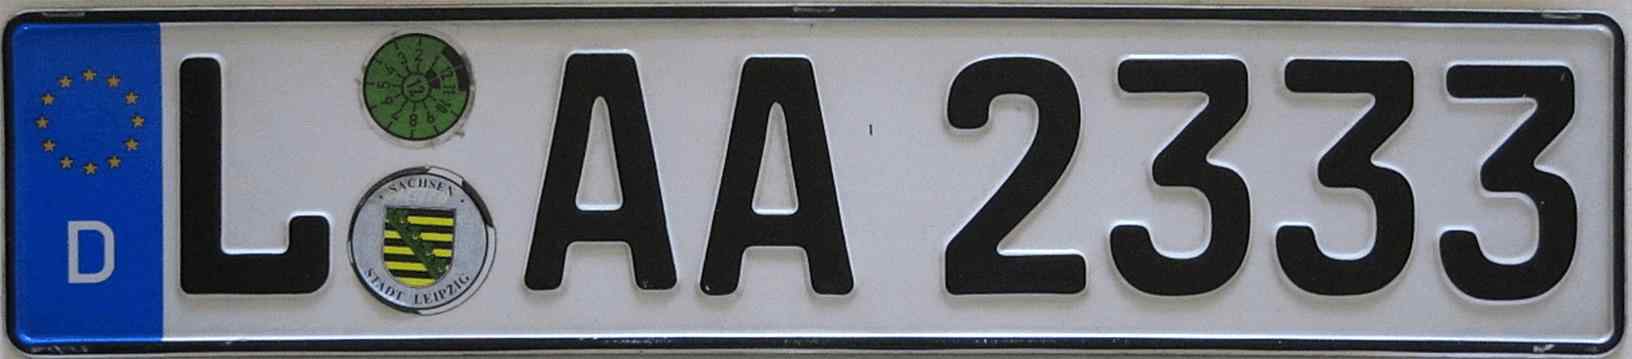 Germany License Plate 2